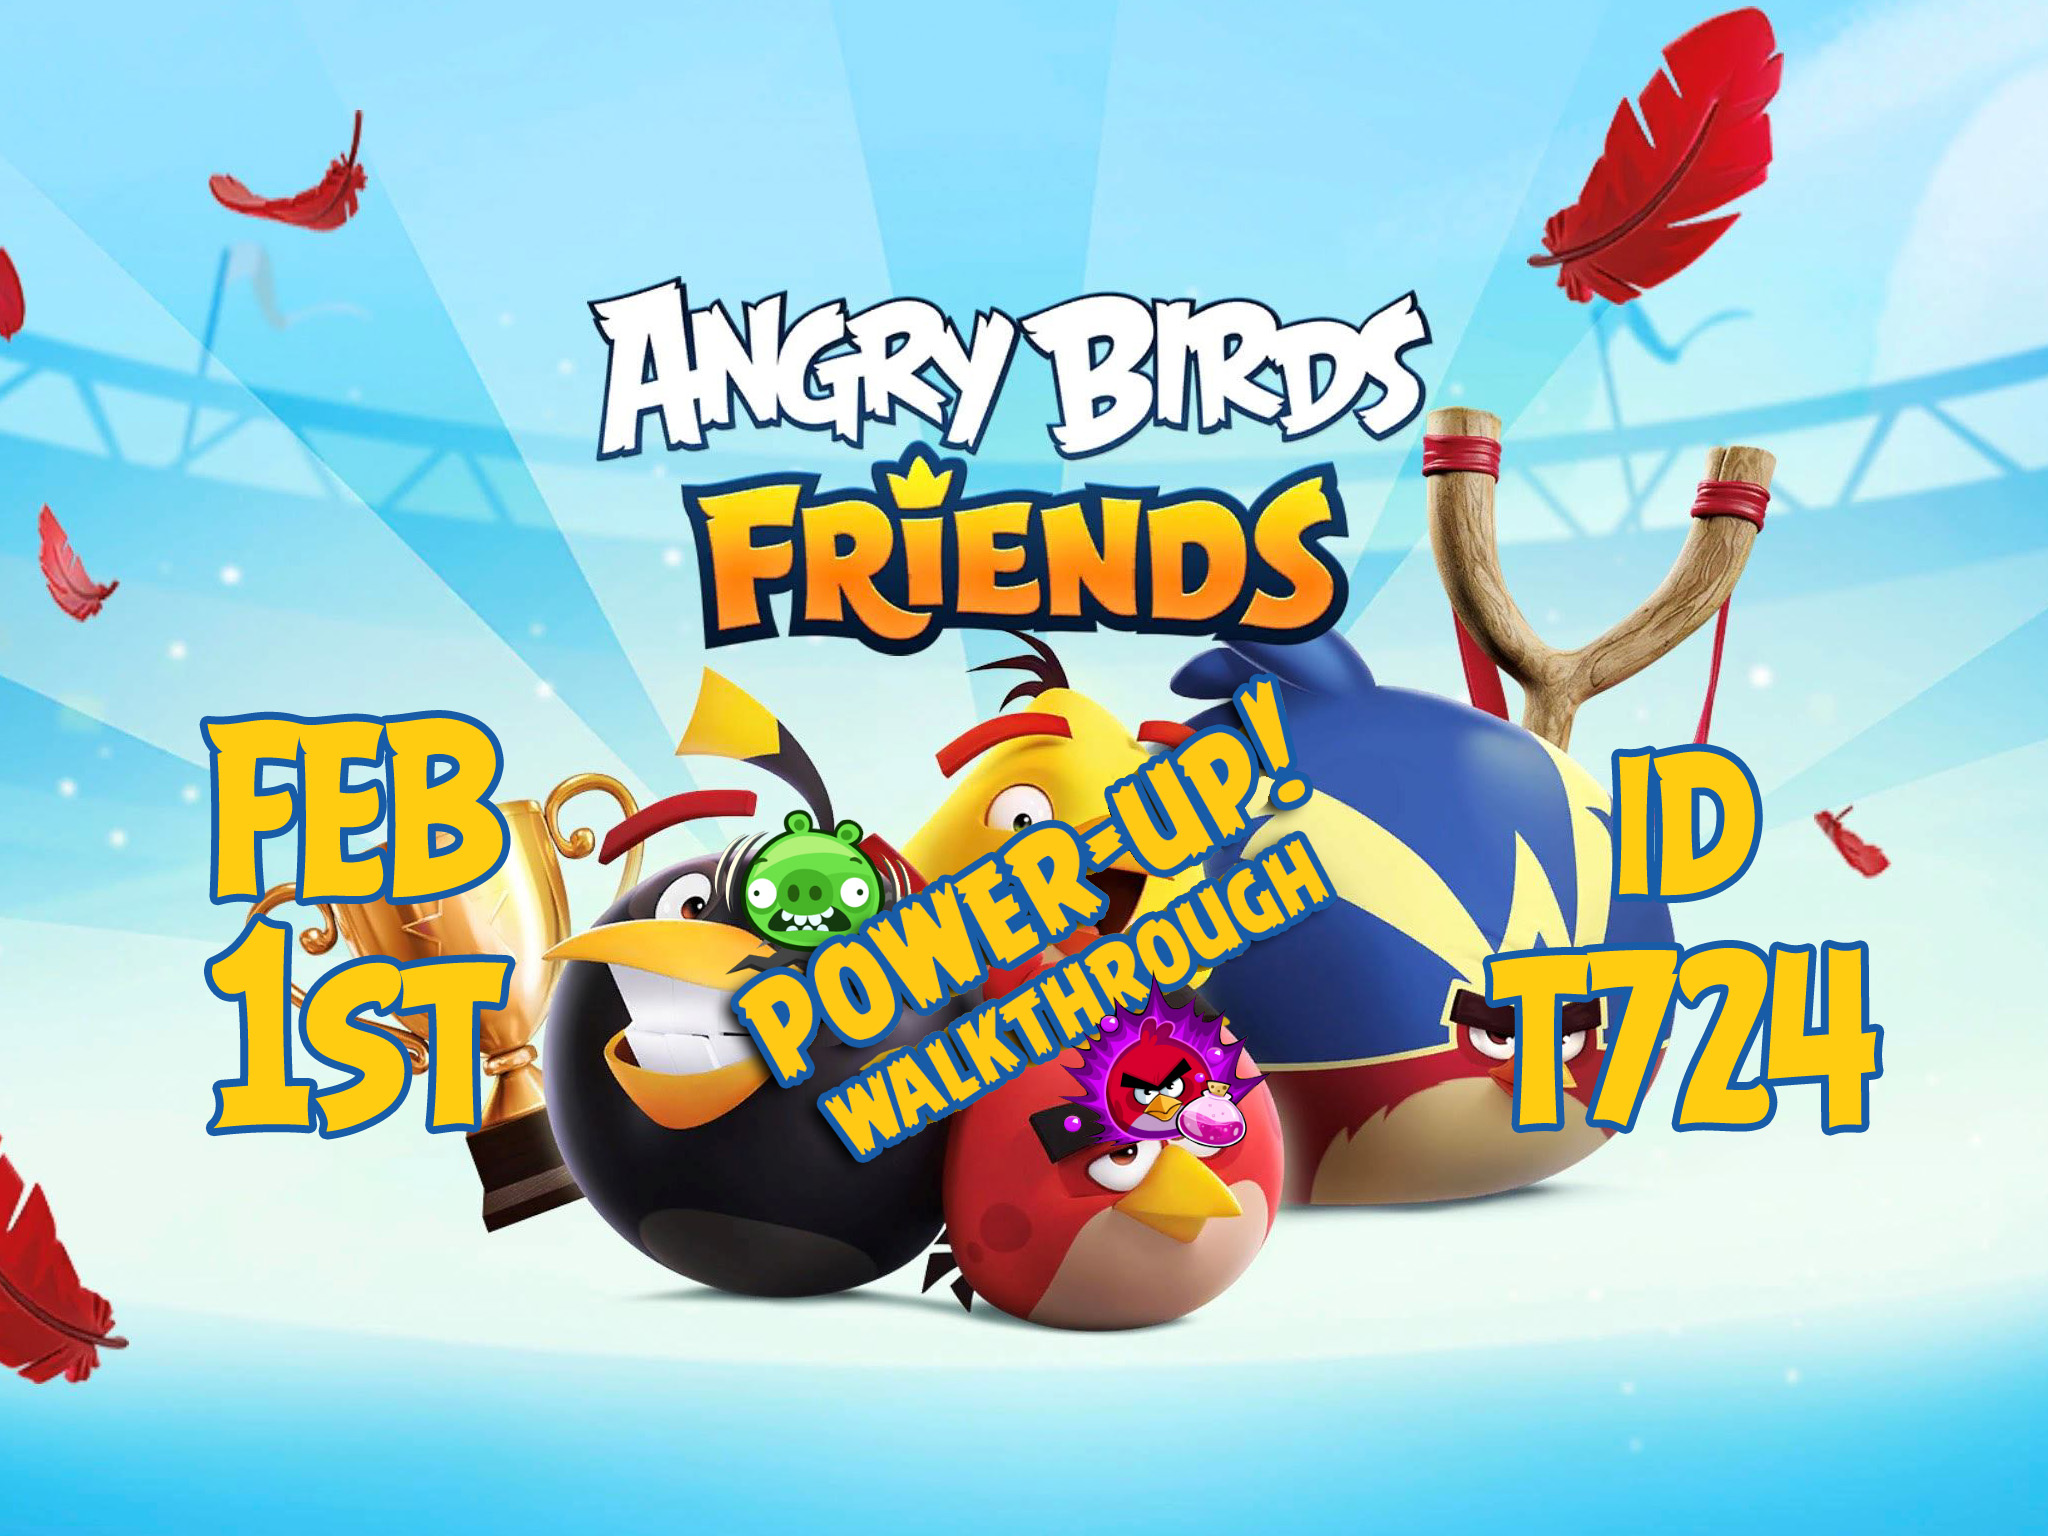 Angry-Birds-Friends-Tournament-T724-Feature-Image-PU